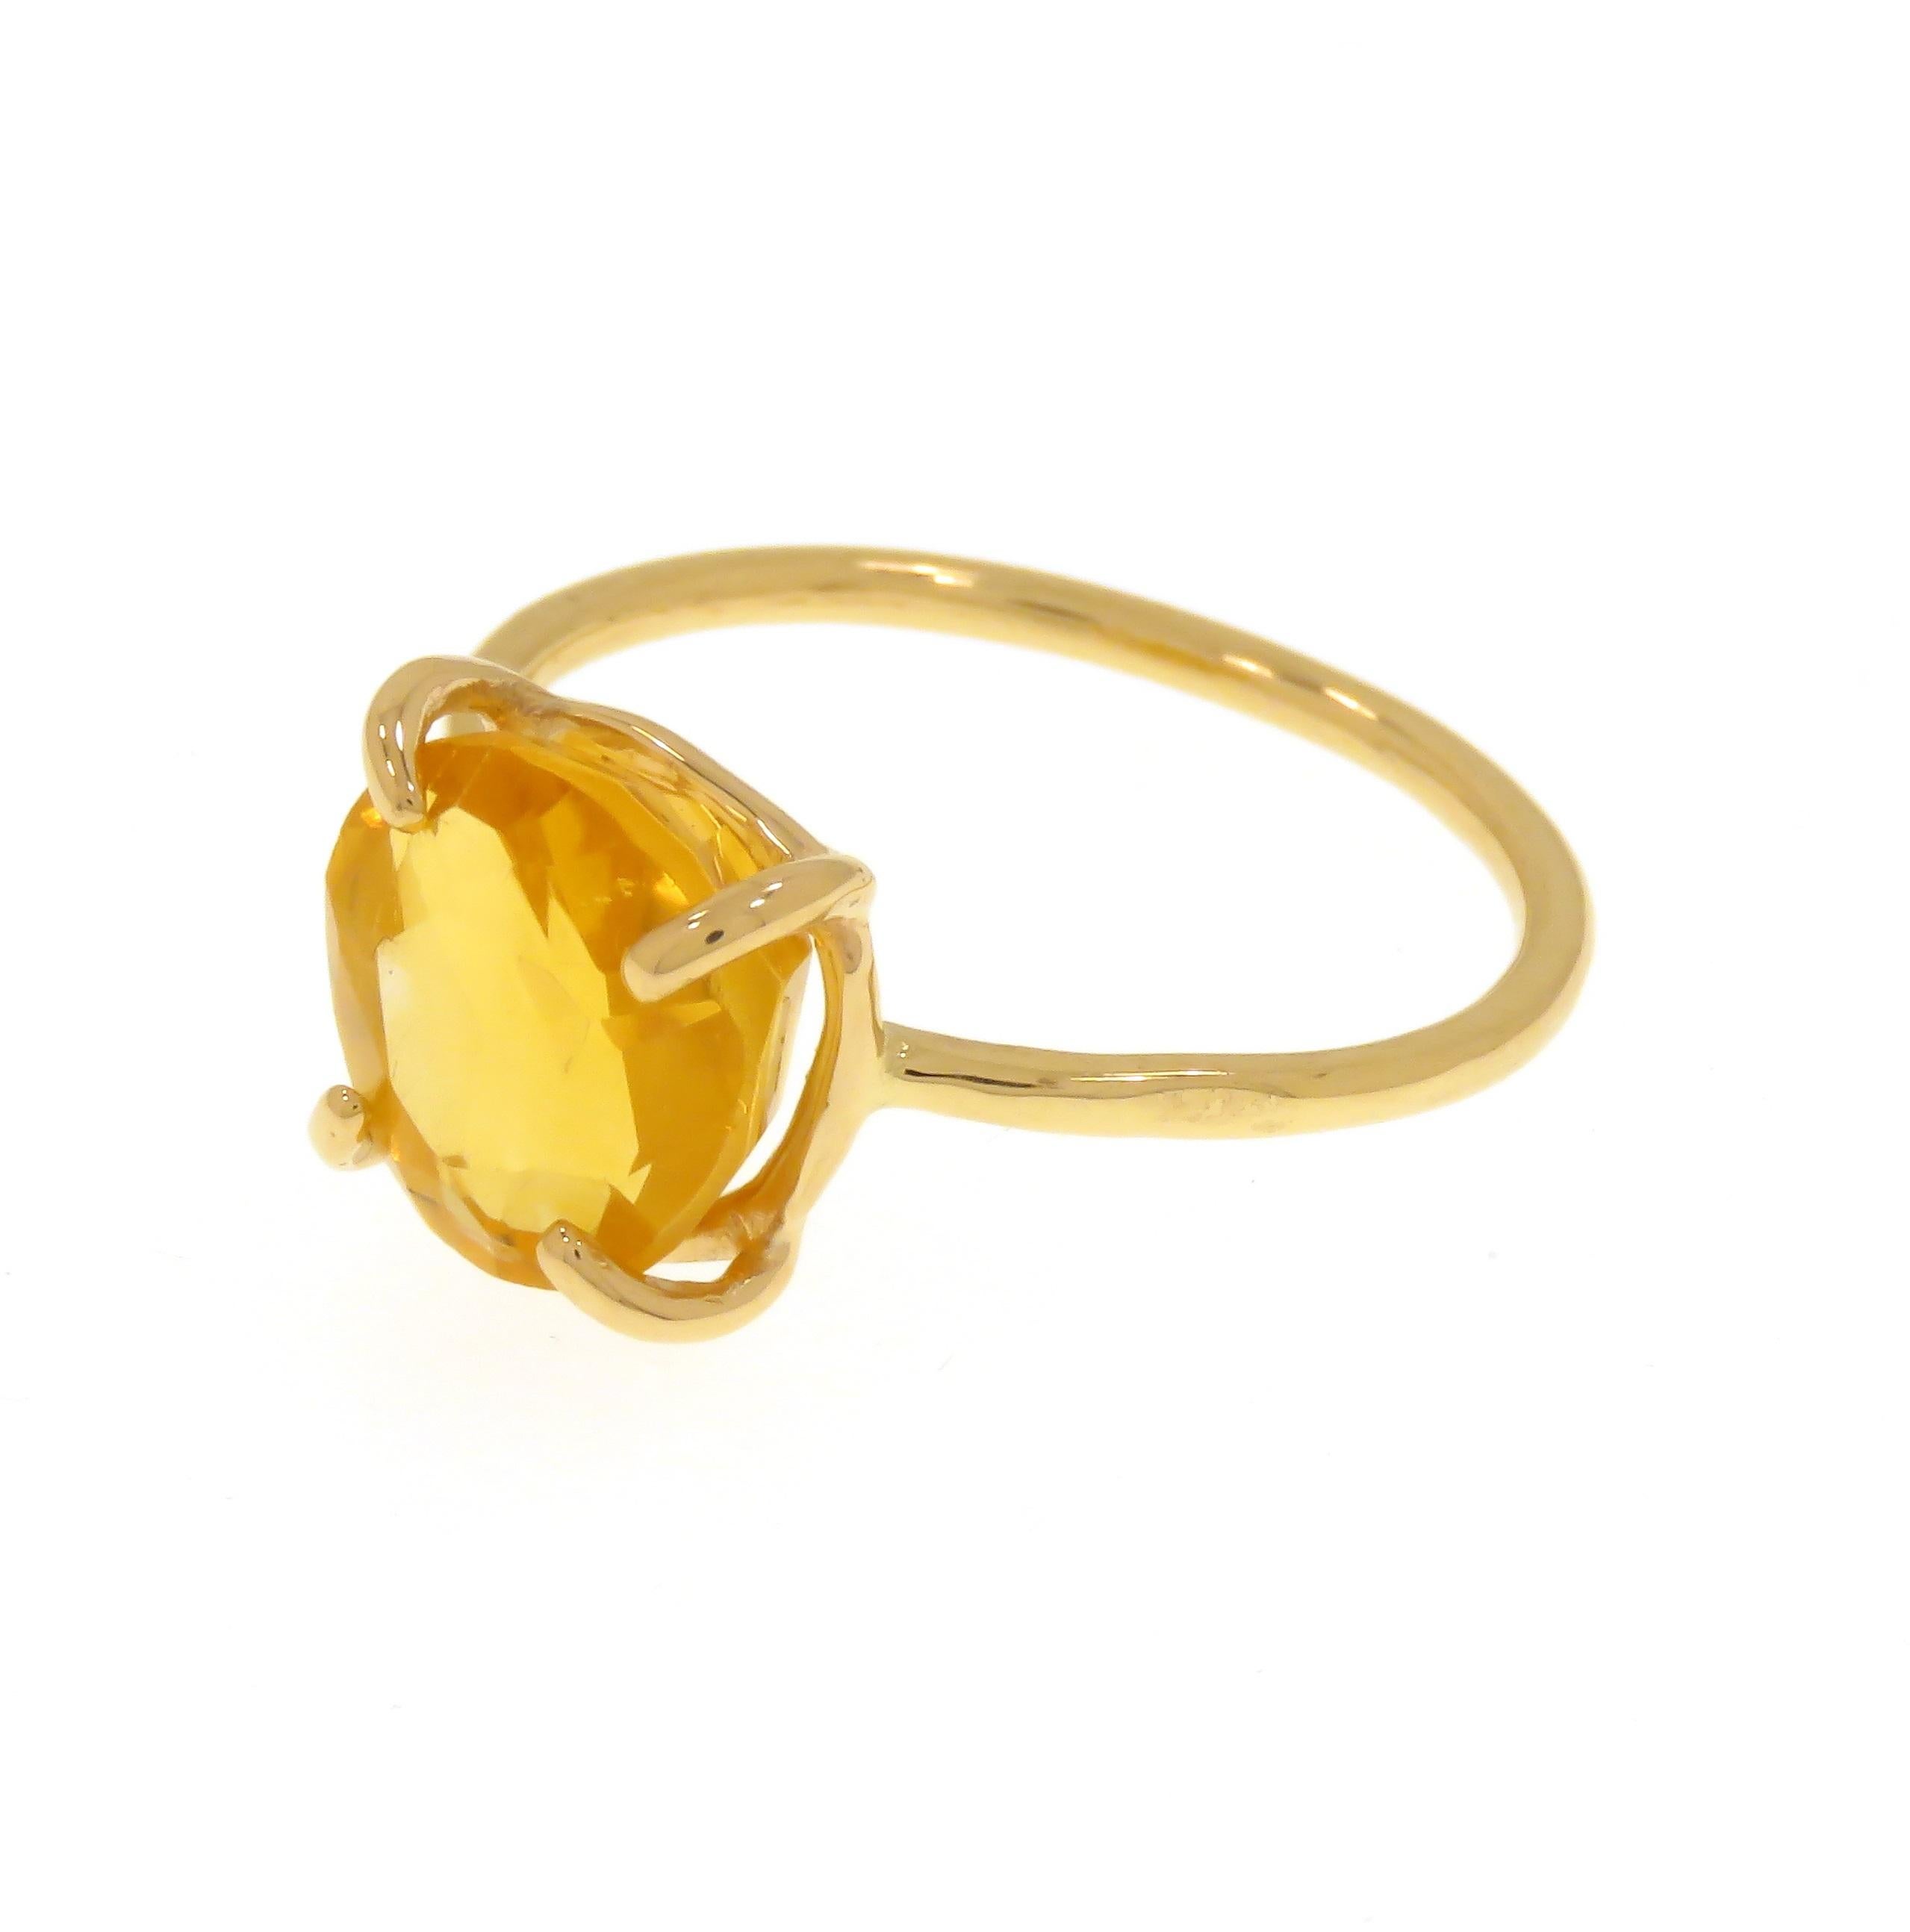 Antique Cushion Cut Antique Cut Yellow Citrine 9 Karat Rose Gold Ring Handcrafted in Italy For Sale